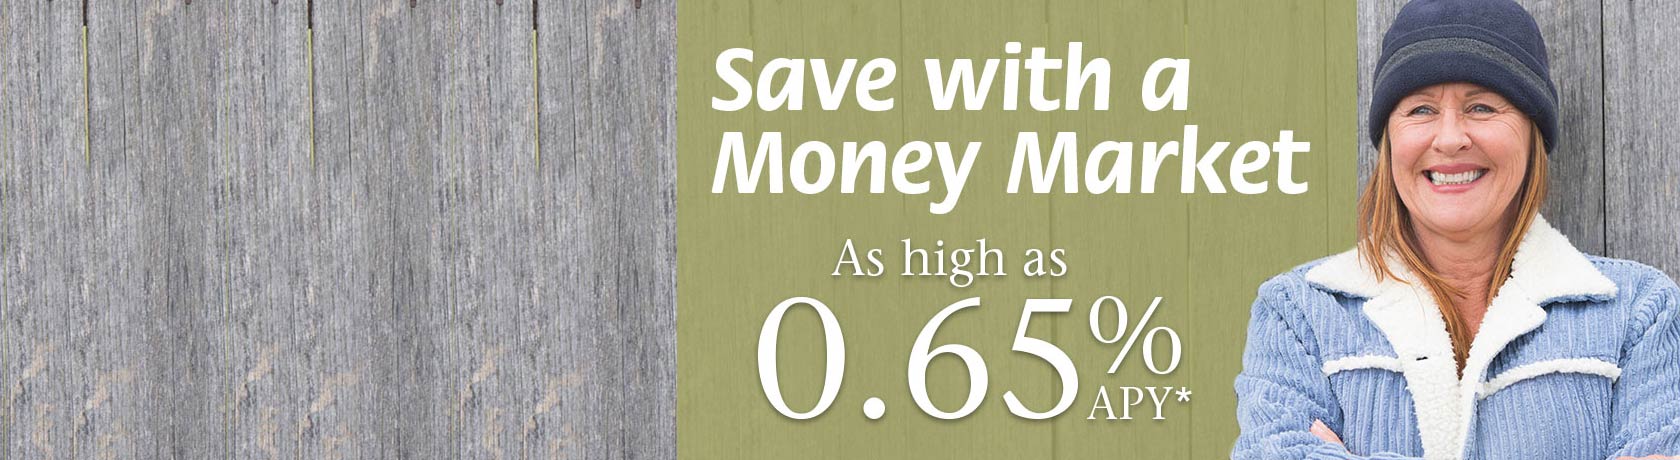 Save with a Money Market